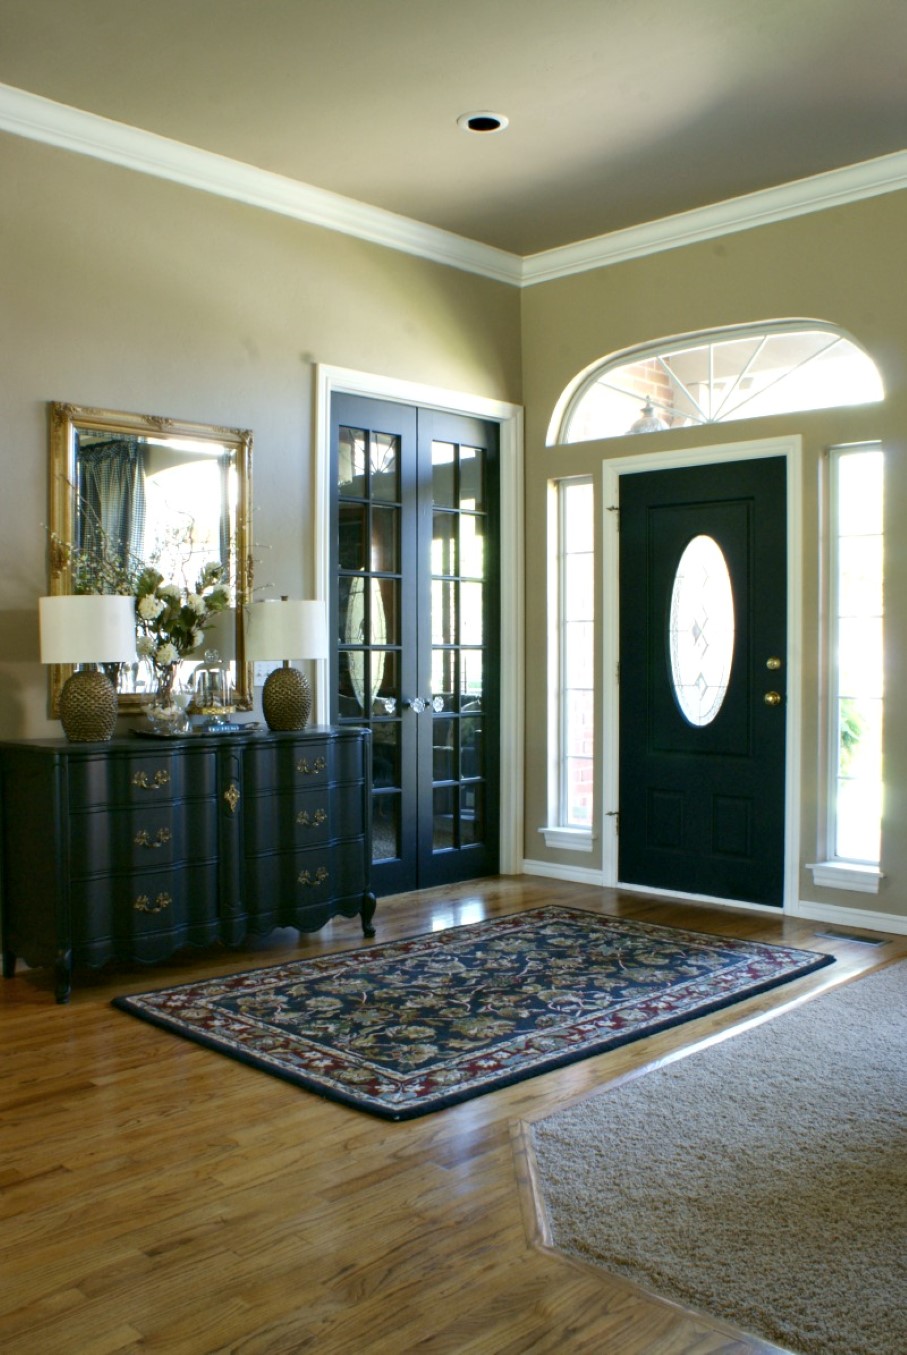 Brown Foyer Color Neutral Brown Foyer Wall Paint Color Background Paired With Black Side Board And Decorative Front Door Under Fanlight Design House Designs  Black Interior Doors Perform Cool Doors 